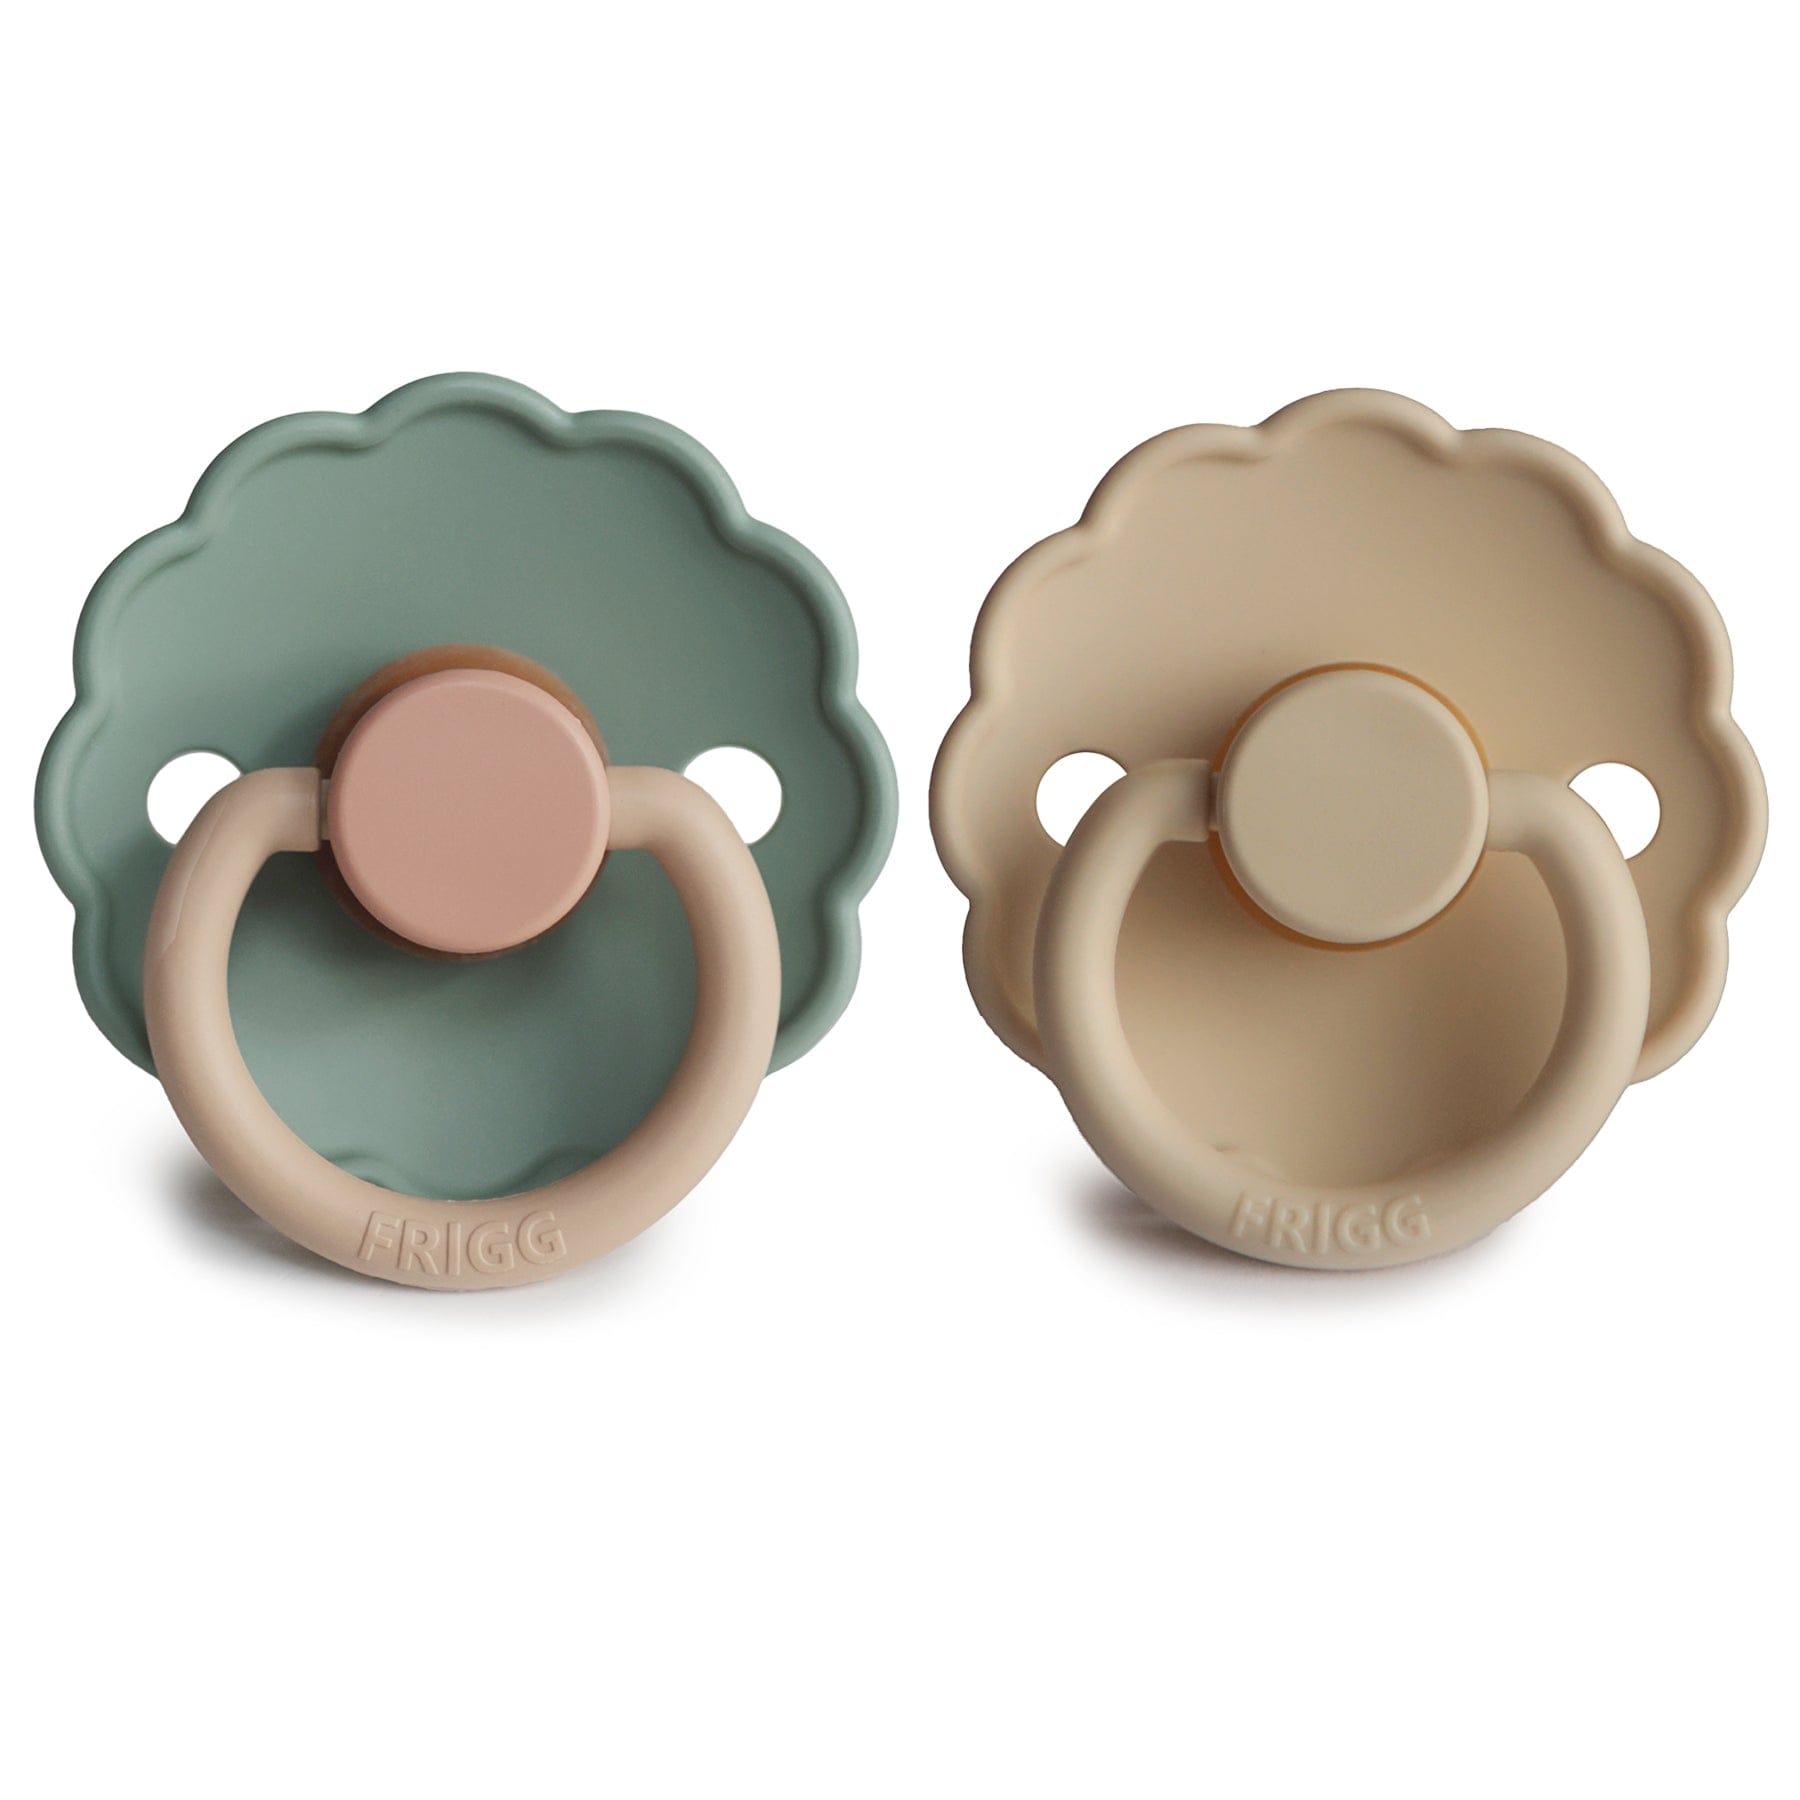 Mushie Soother FRIGG Daisy Natural Rubber Baby Pacifier (Willow/Croissant) 2-Pack